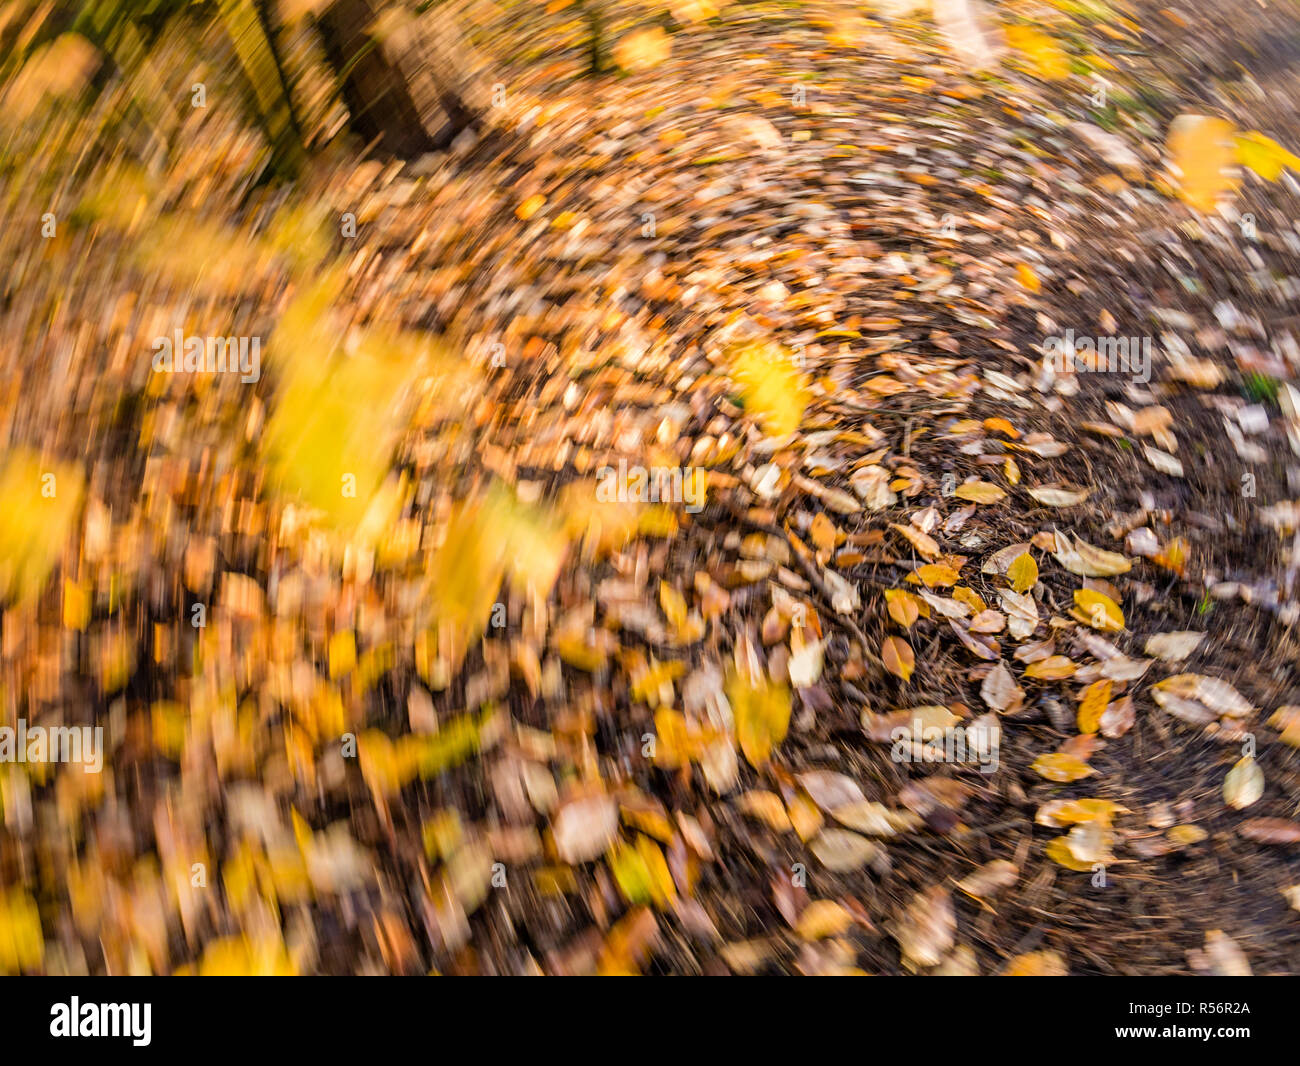 Autumn leaves in yellow and orange falling and fallen in rotating motion blur - purposely blurred Stock Photo